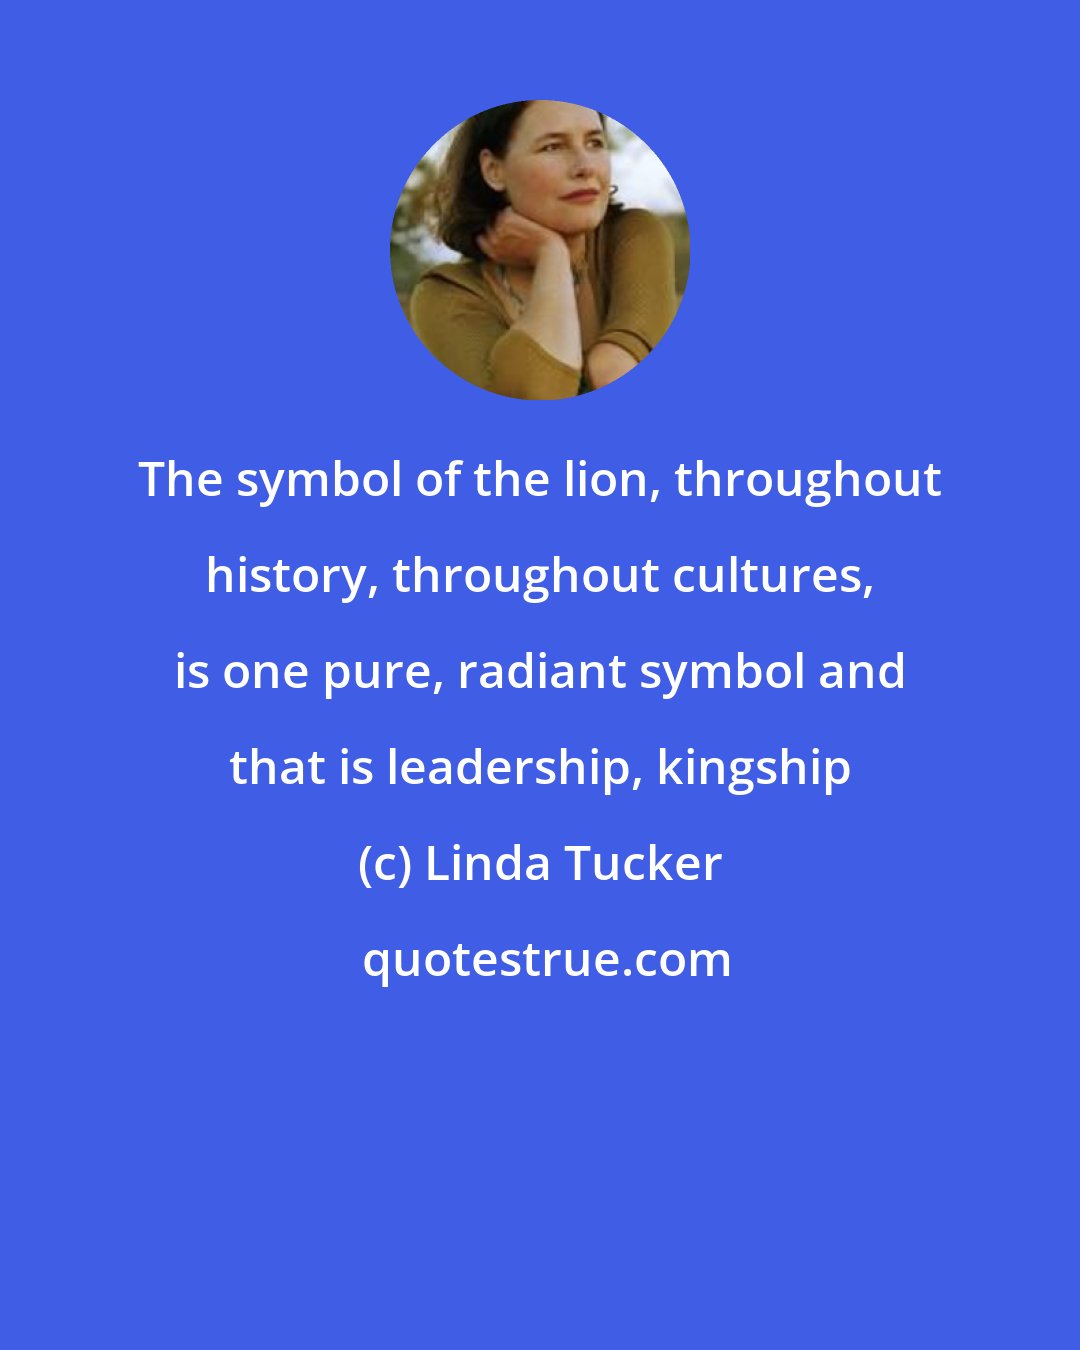 Linda Tucker: The symbol of the lion, throughout history, throughout cultures, is one pure, radiant symbol and that is leadership, kingship